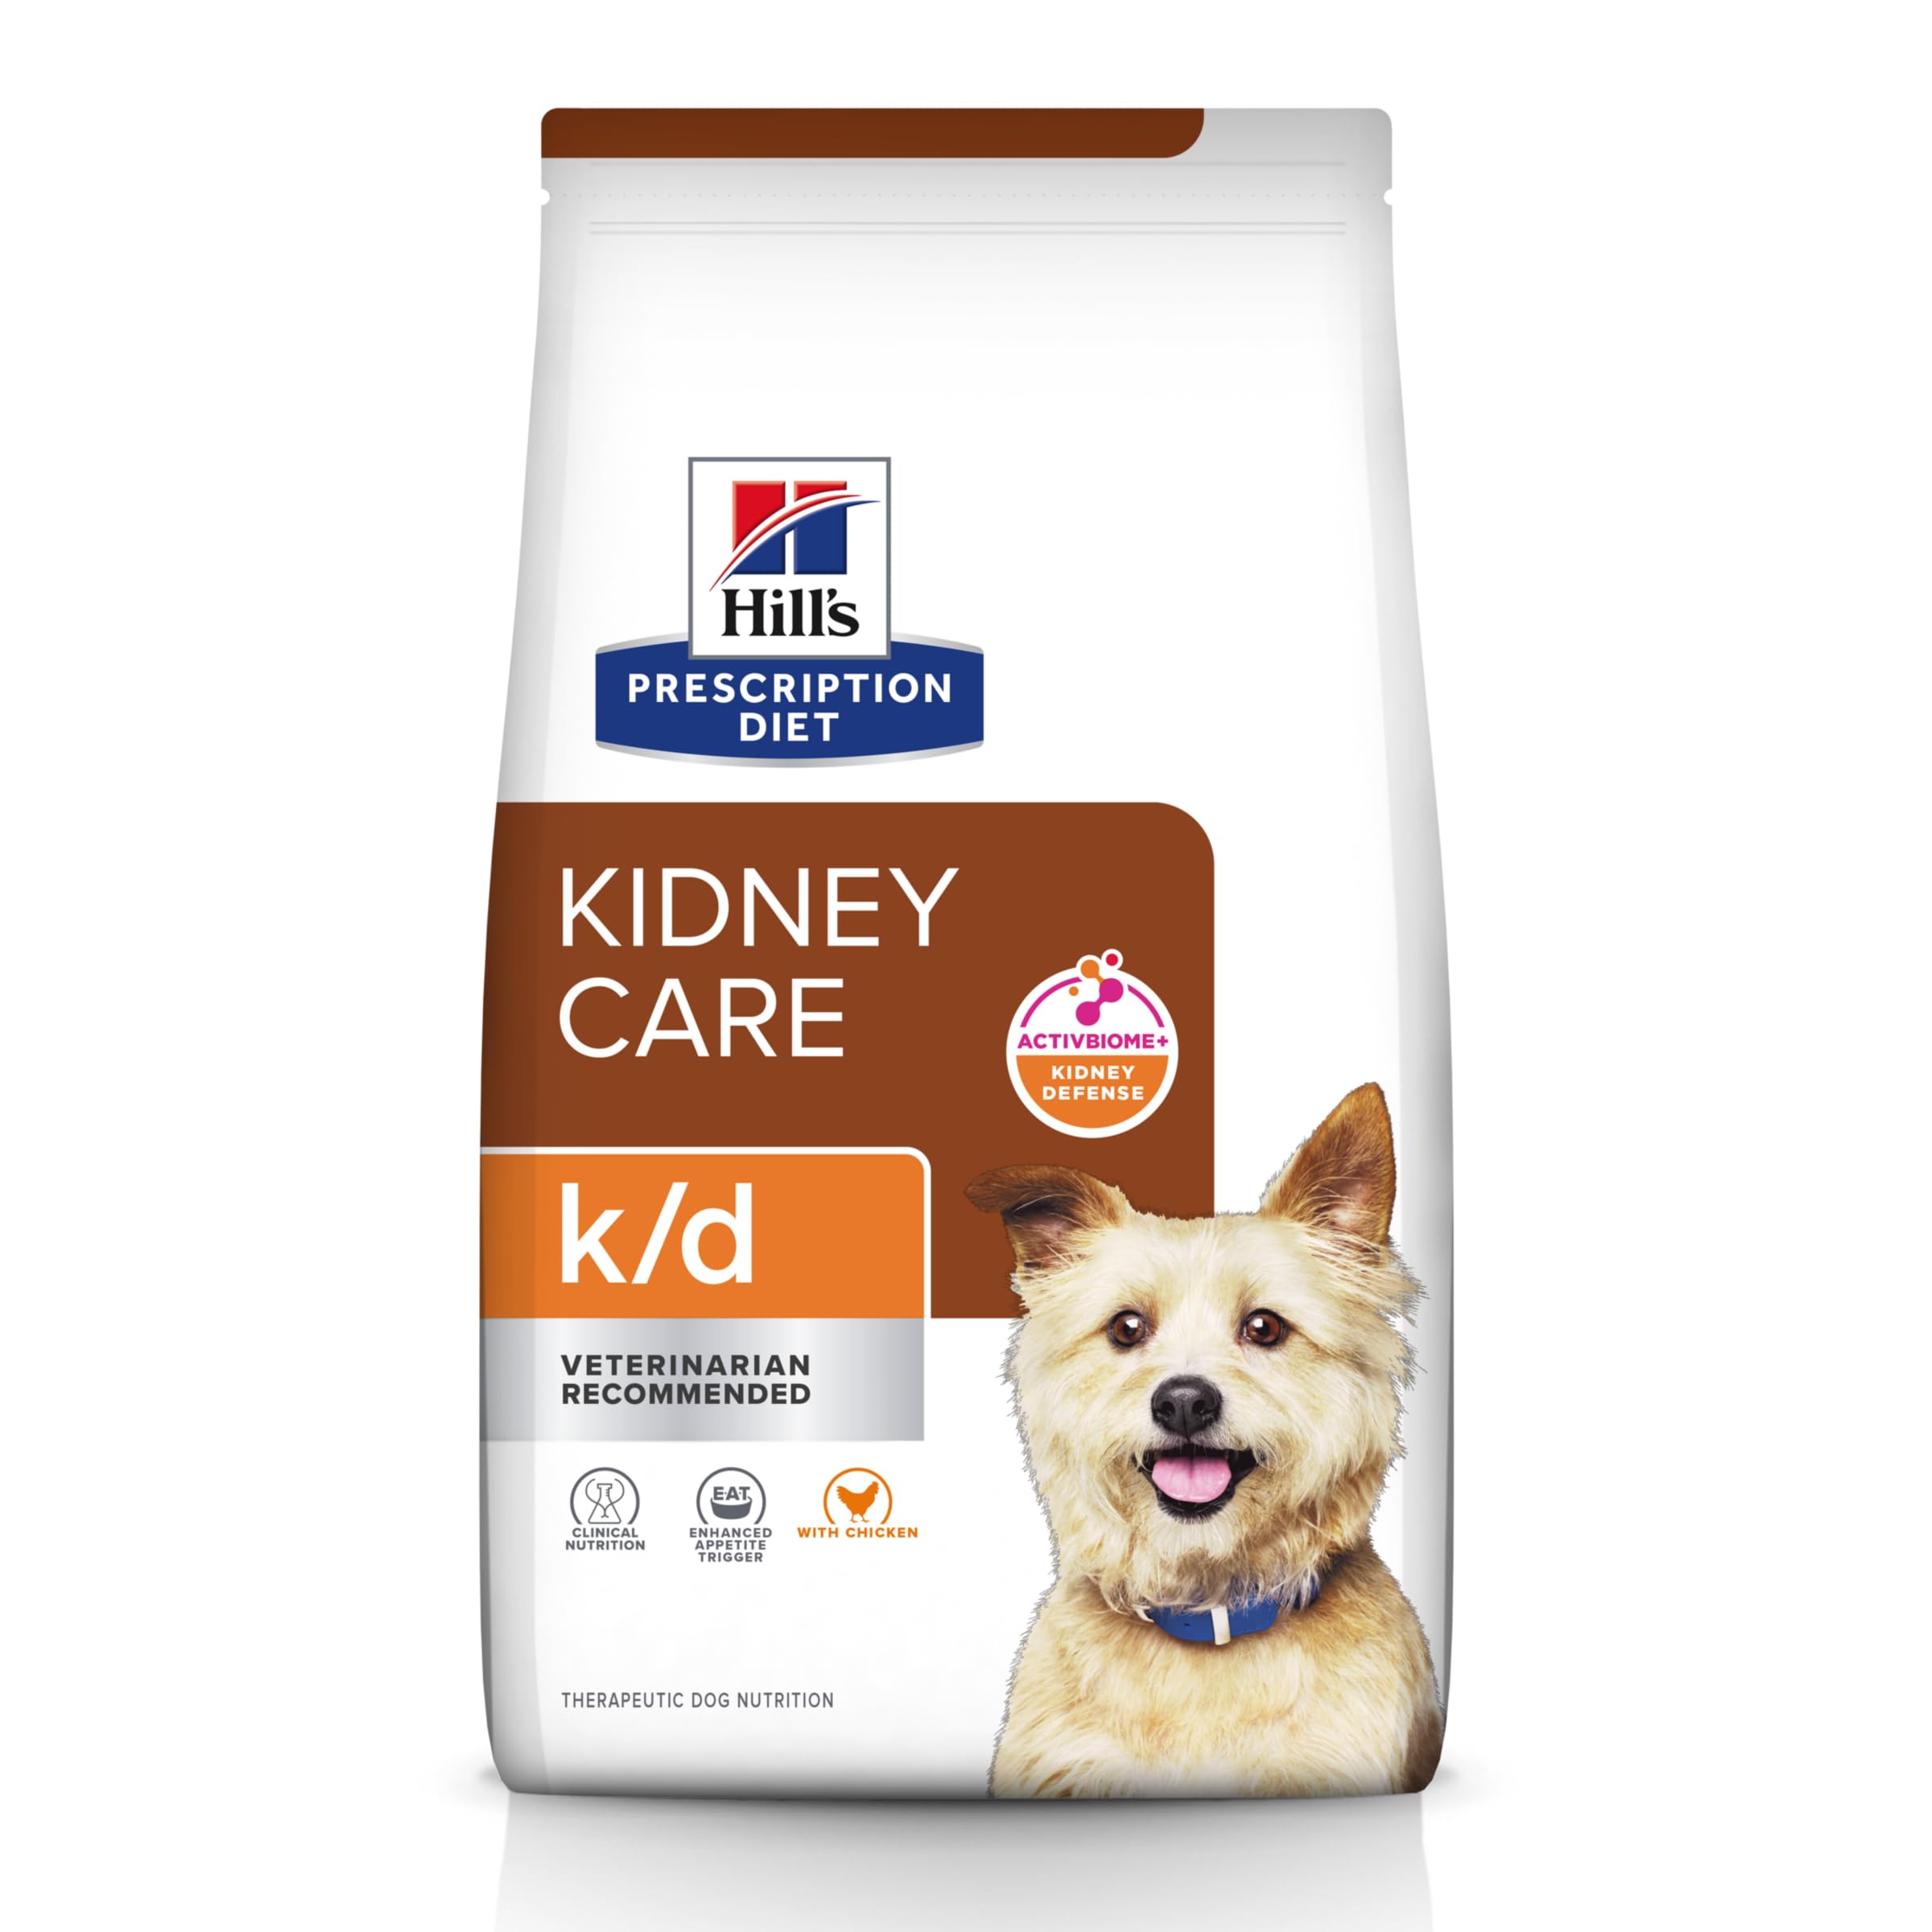 HILL'S PRESCRIPTION DIET k/d Kidney Care with Chicken Dry Dog Food, Veterinary Diet